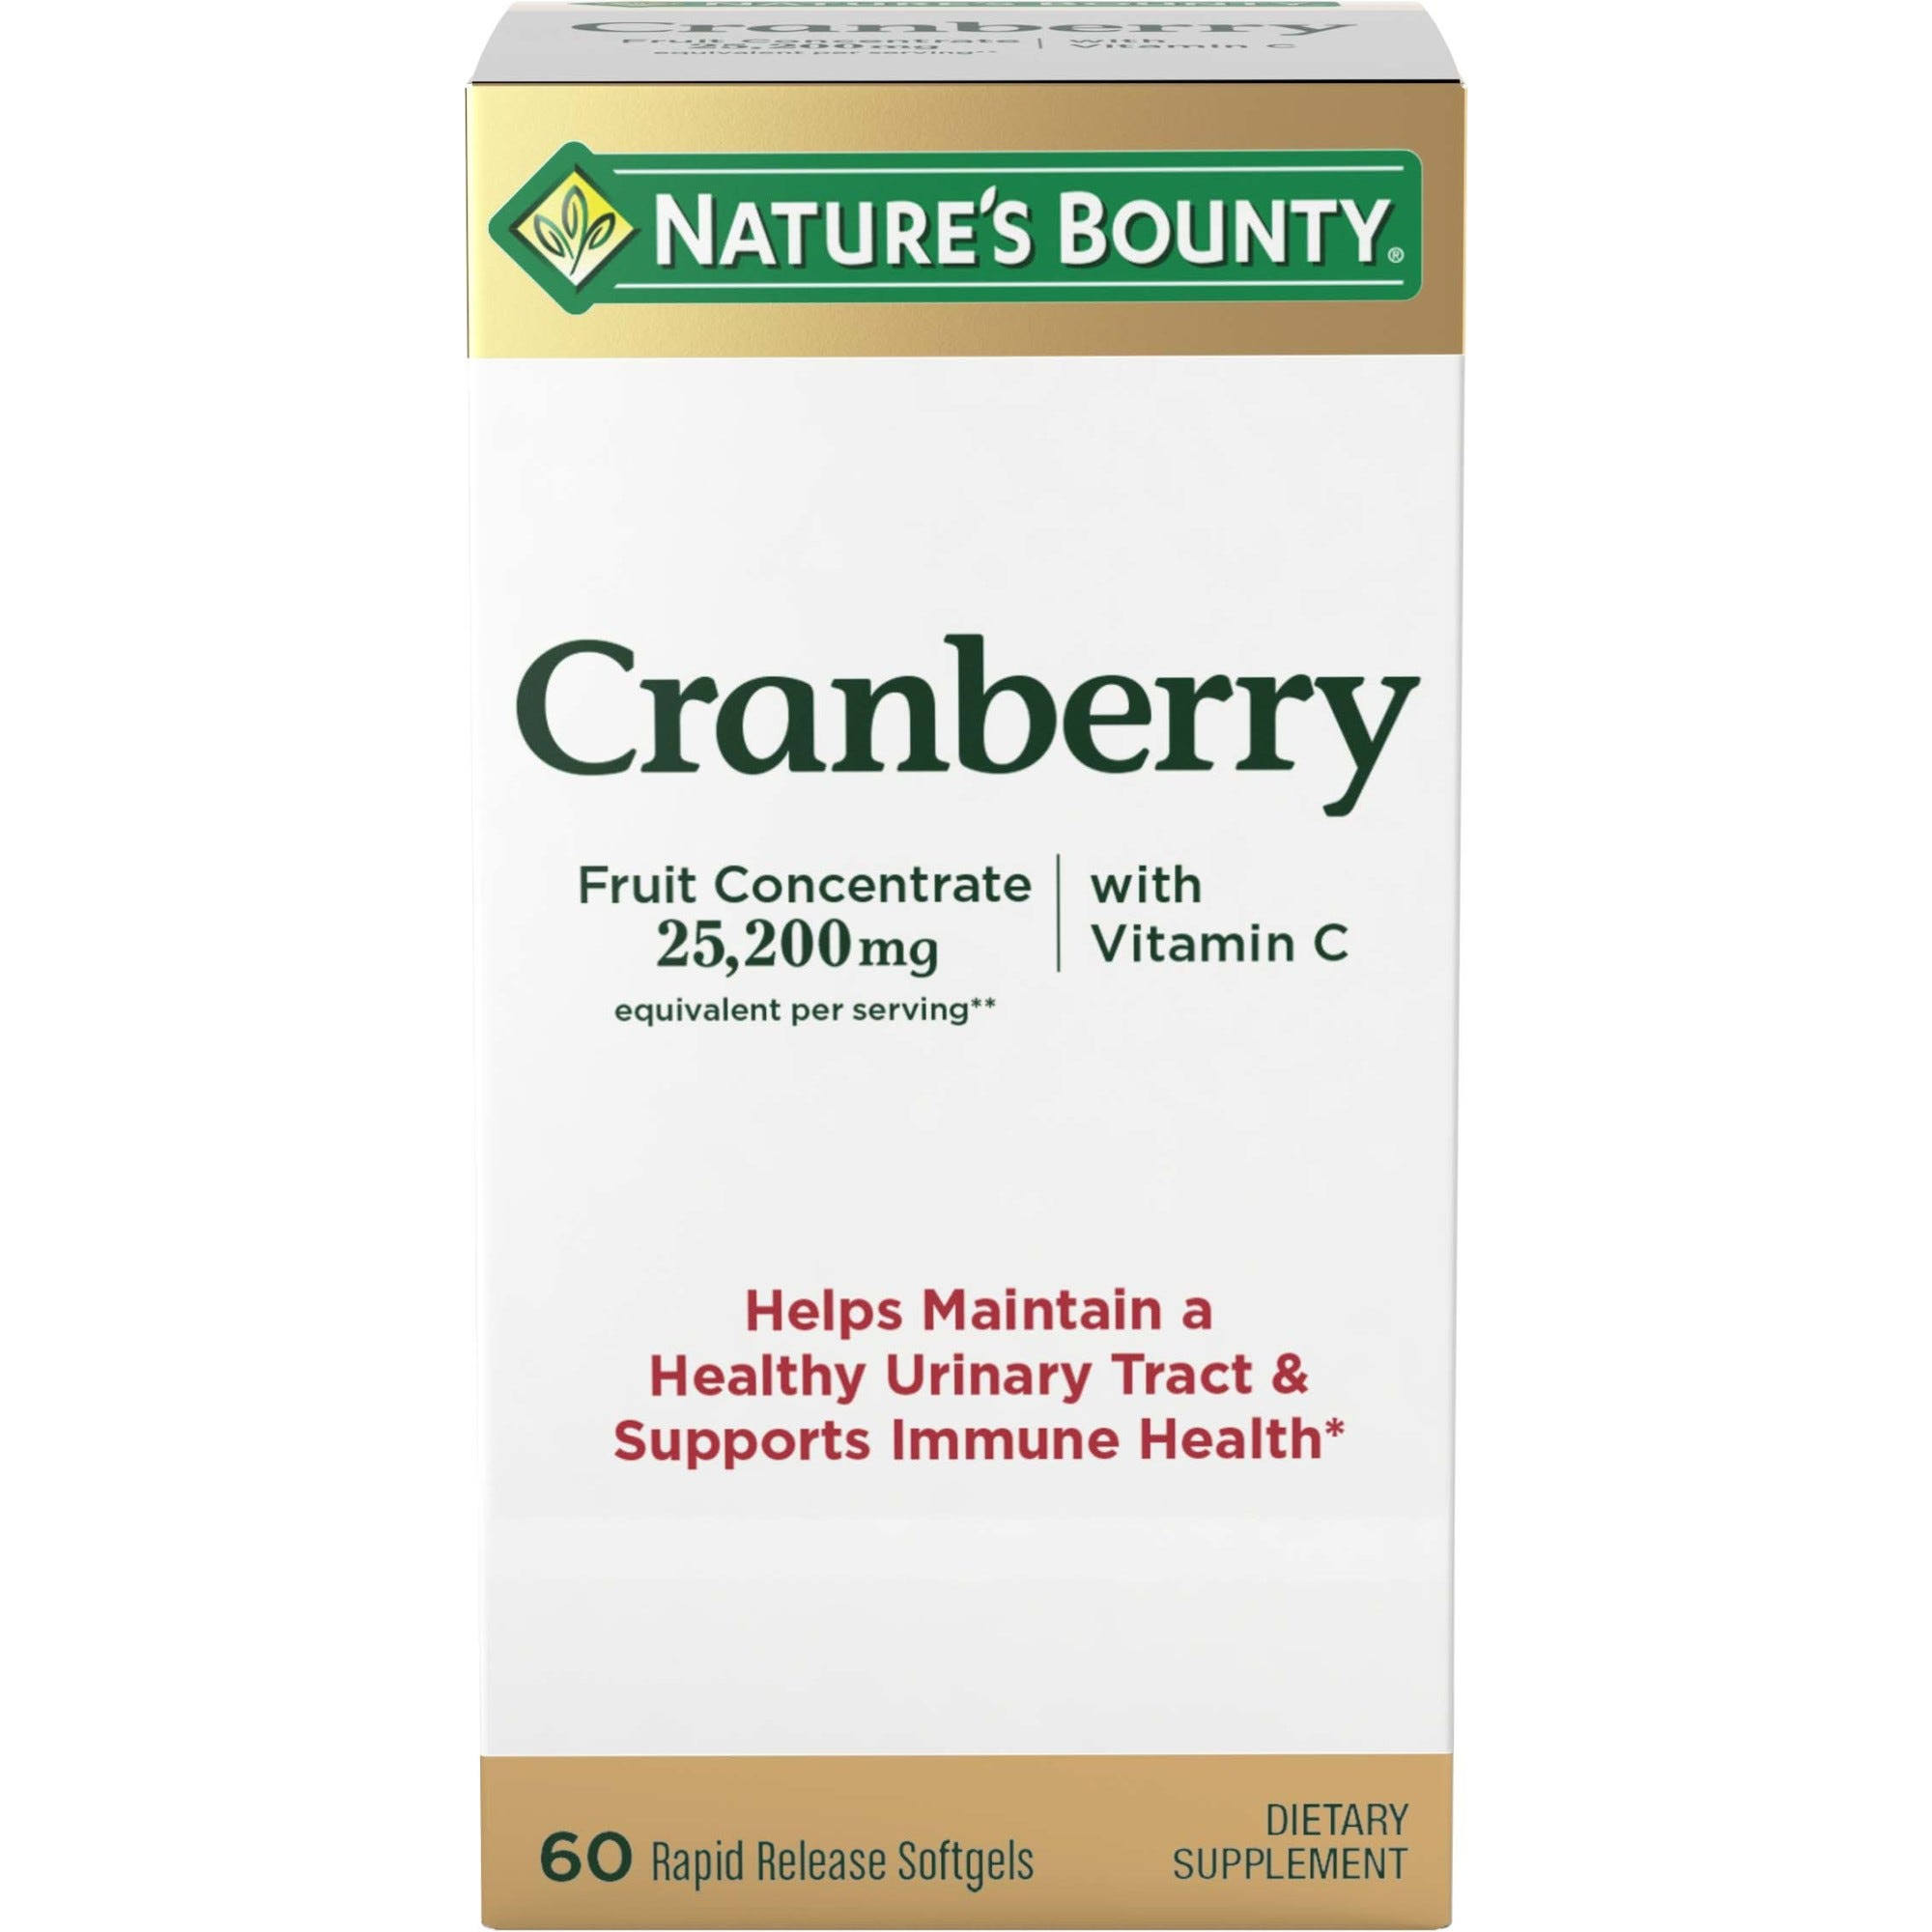 Nature's Bounty Cranberry Rapid Release Softgels Dietary Supplement - 25200mg, 60 Pack